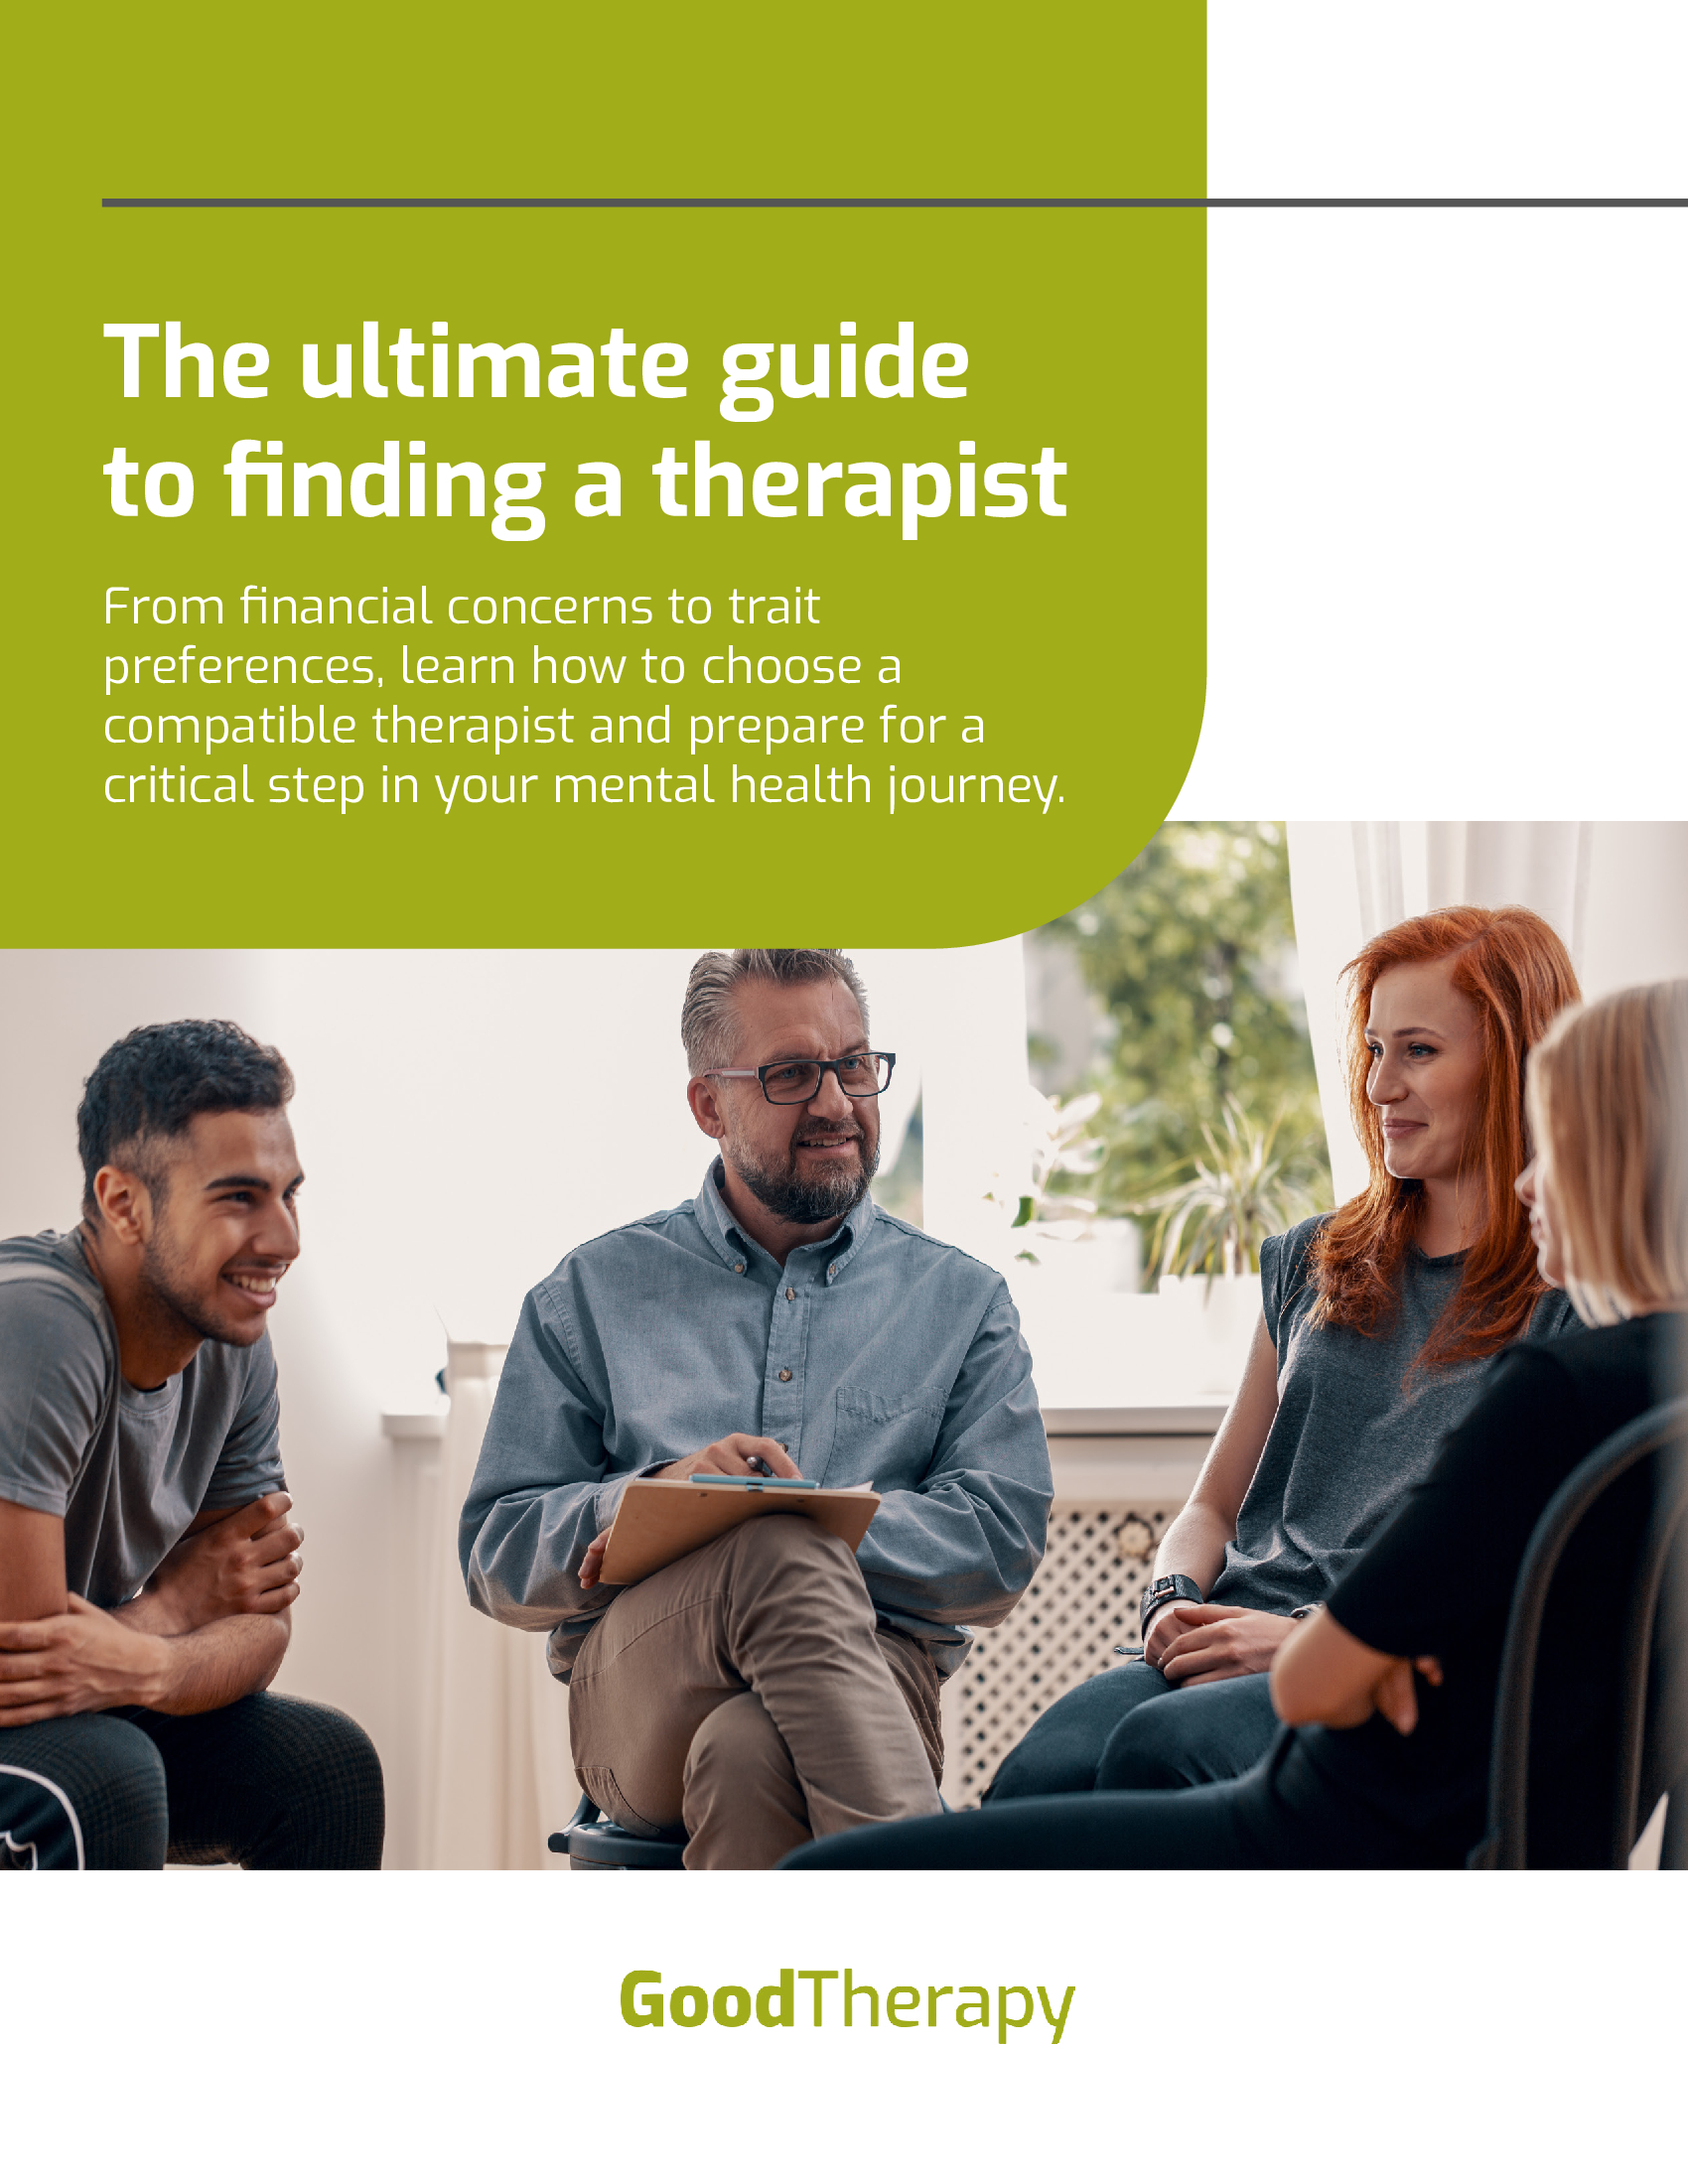  The Ultimate Guide to Finding a Therapist